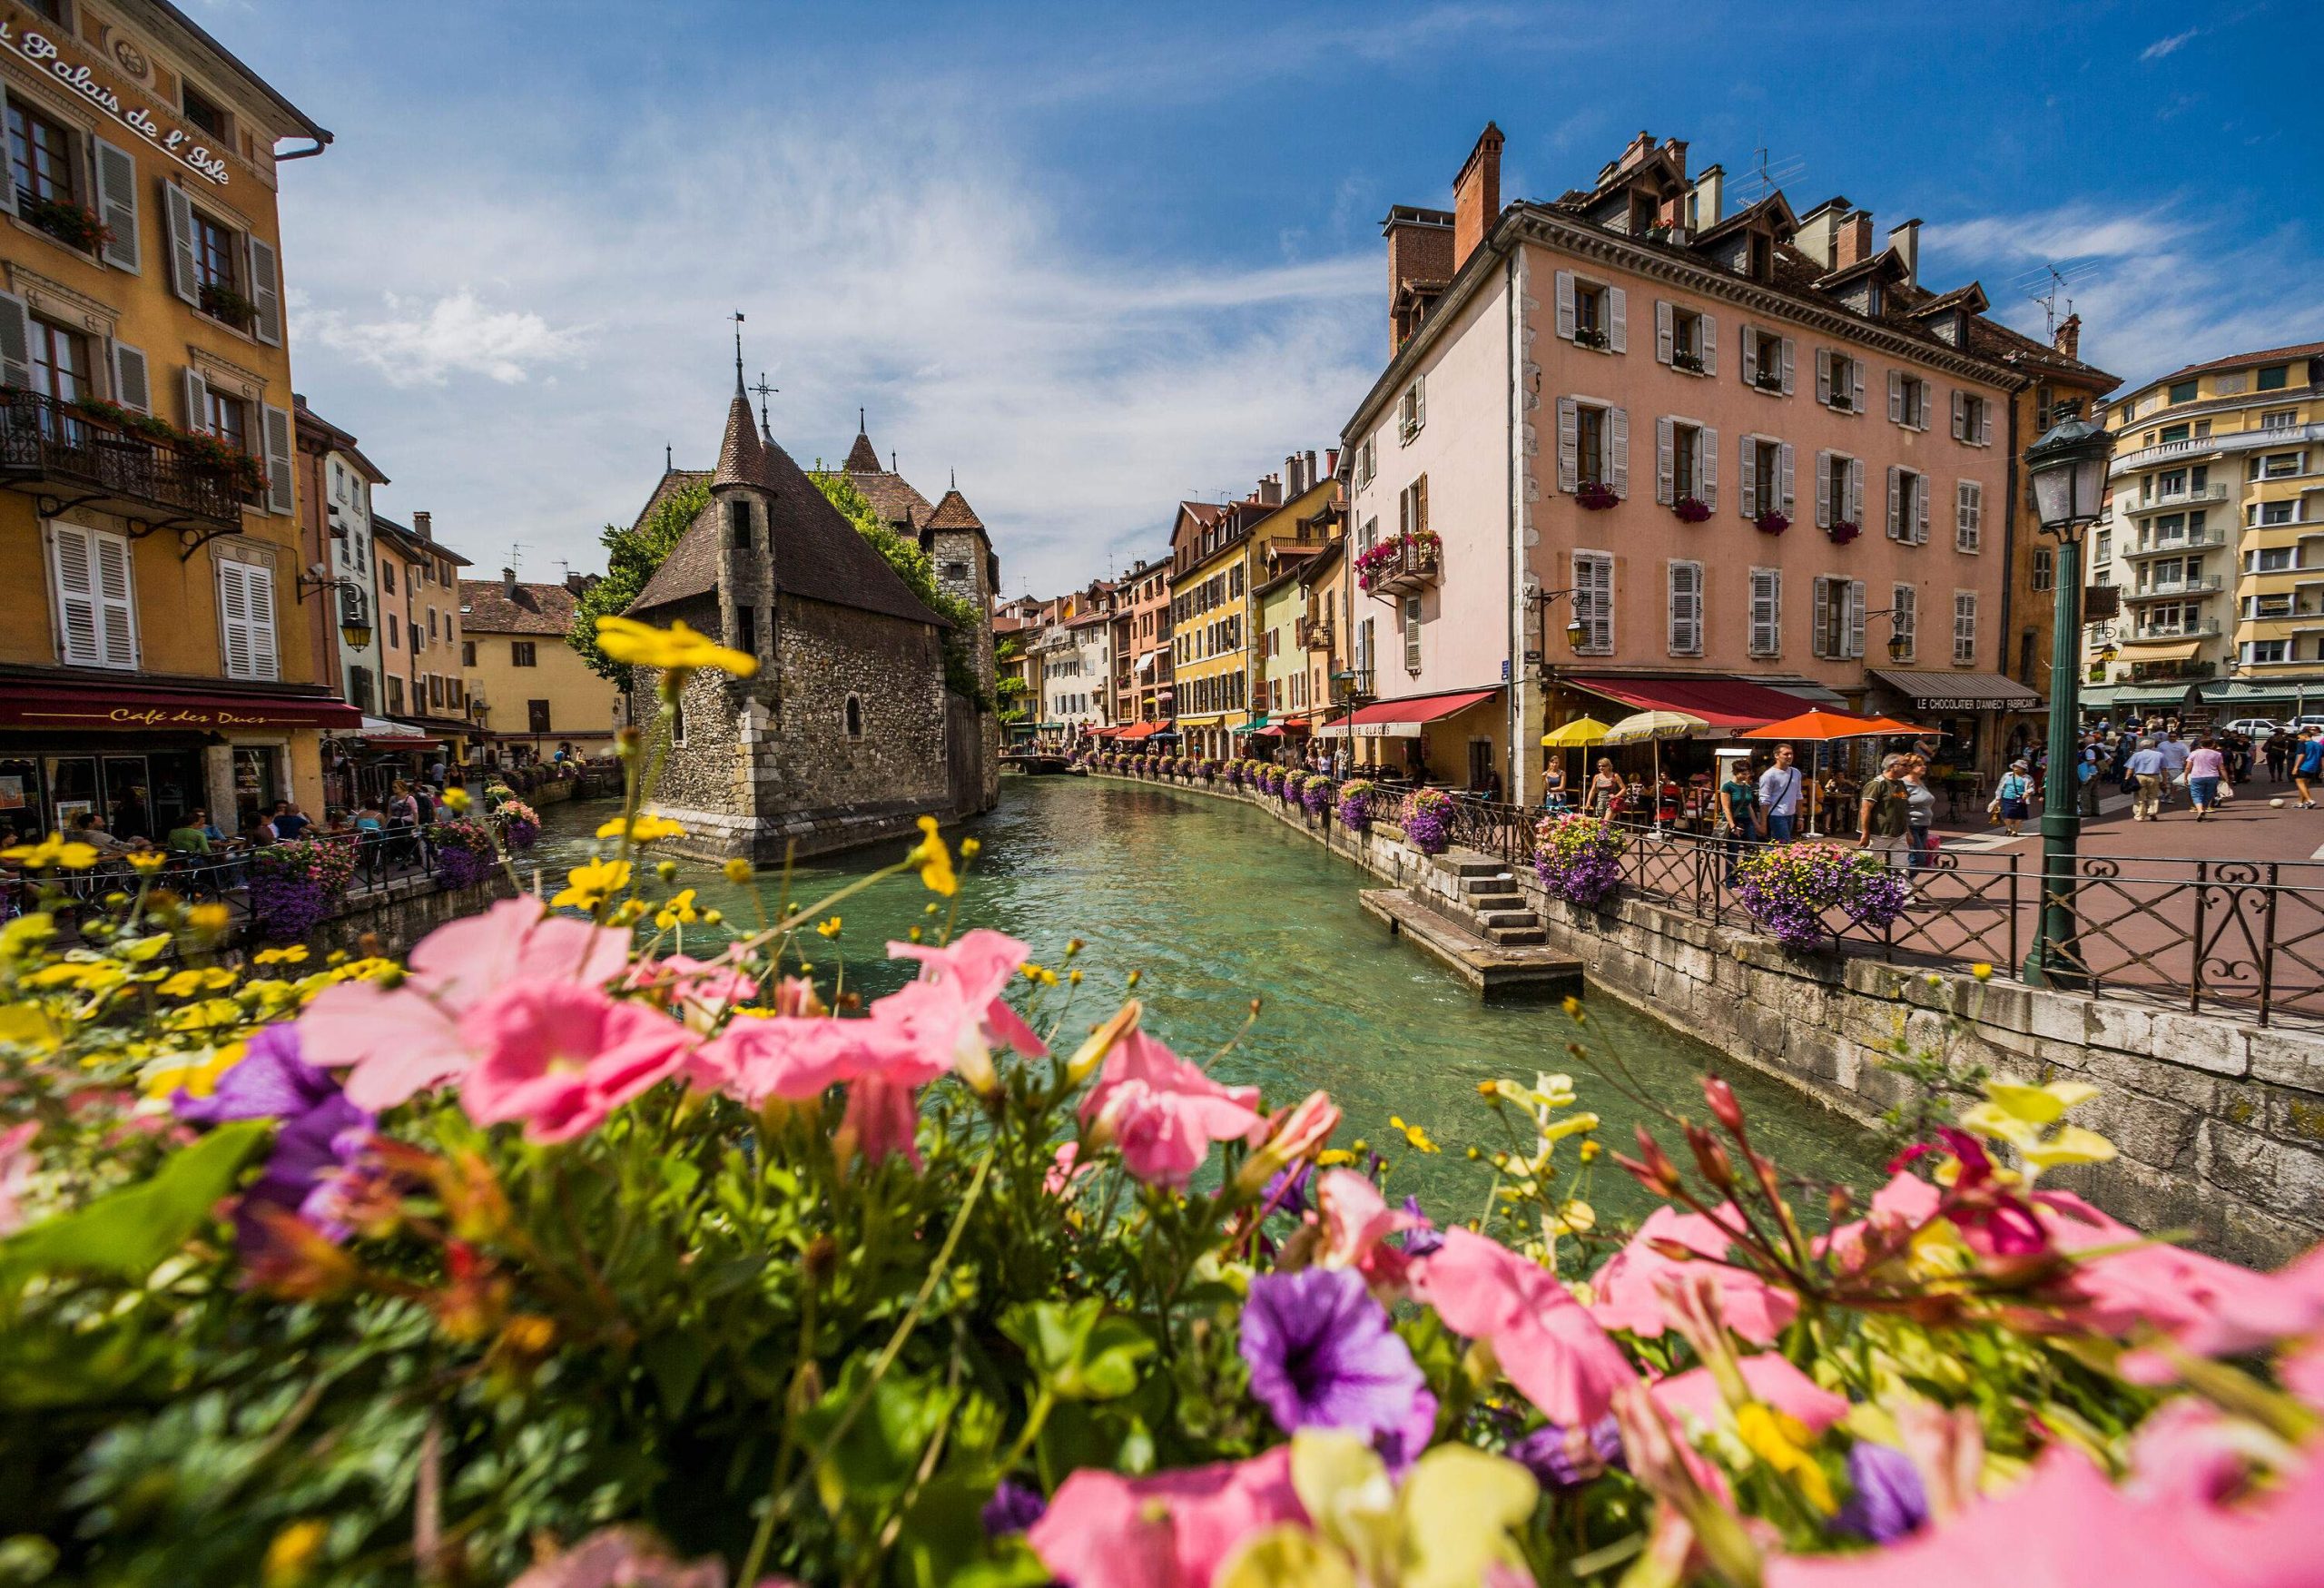 A river bordered by terraced buildings as seen from a colourful bouquet of flowers.